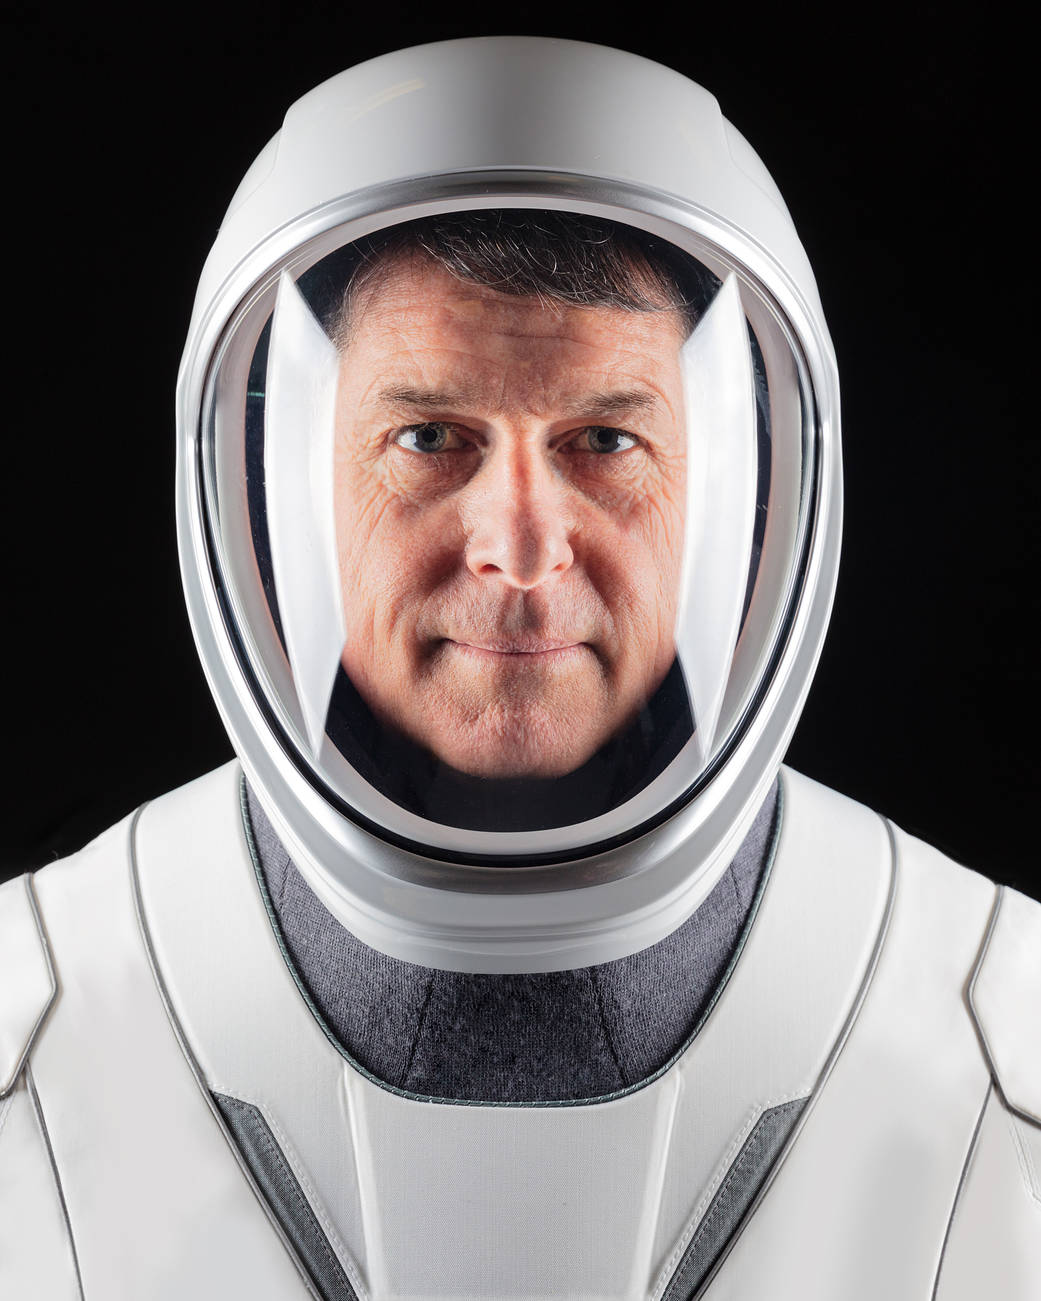 SpaceX Crew-2 Commander Shane Kimbrough of NASA